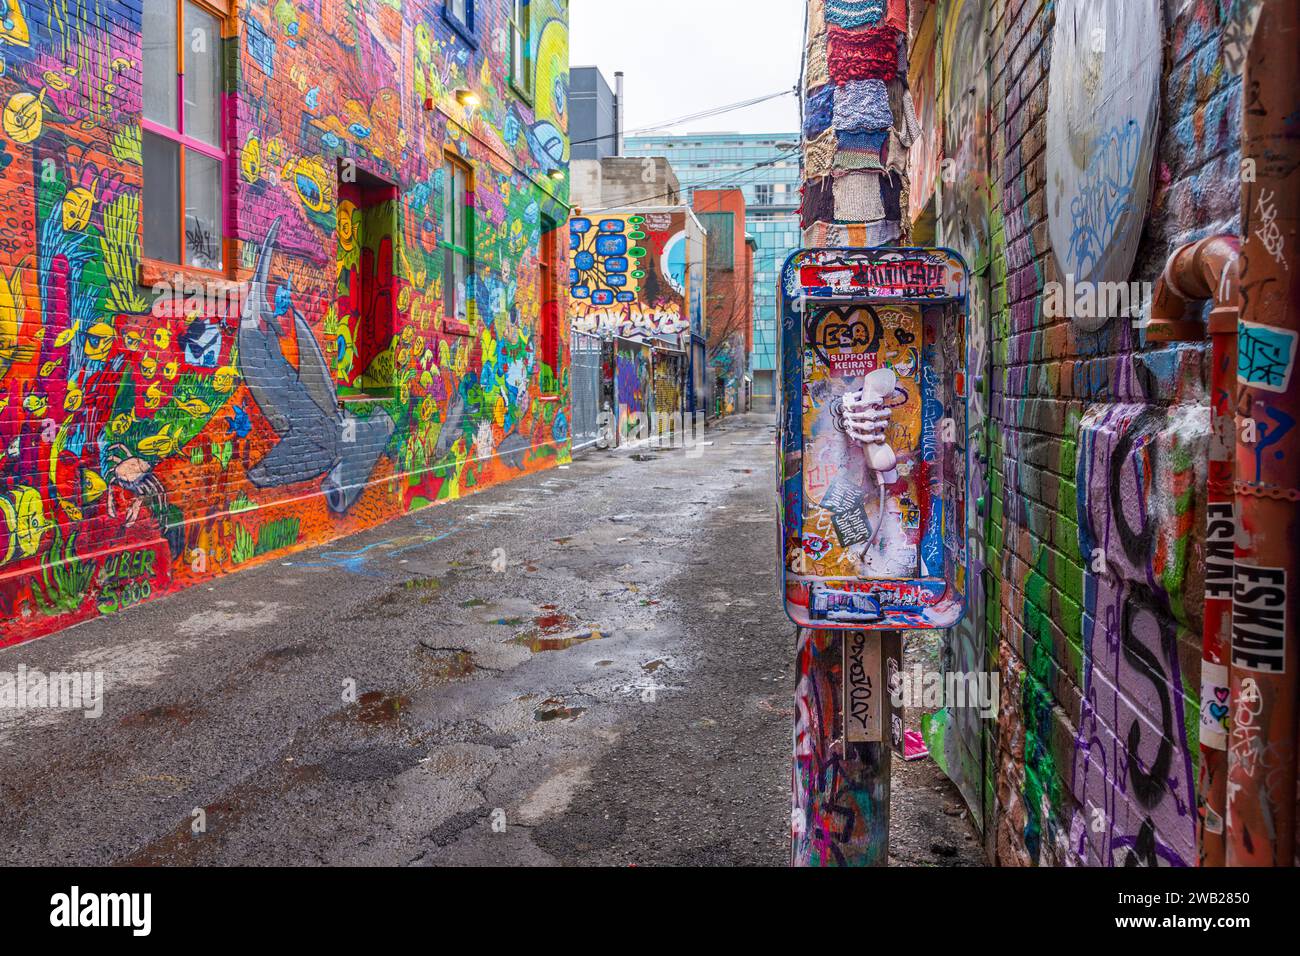 Graffiti Alley, also known as Rush Lane, is a hidden gem in Toronto's Fashion District. It is a narrow alleyway lined with colorful murals and street Stock Photo